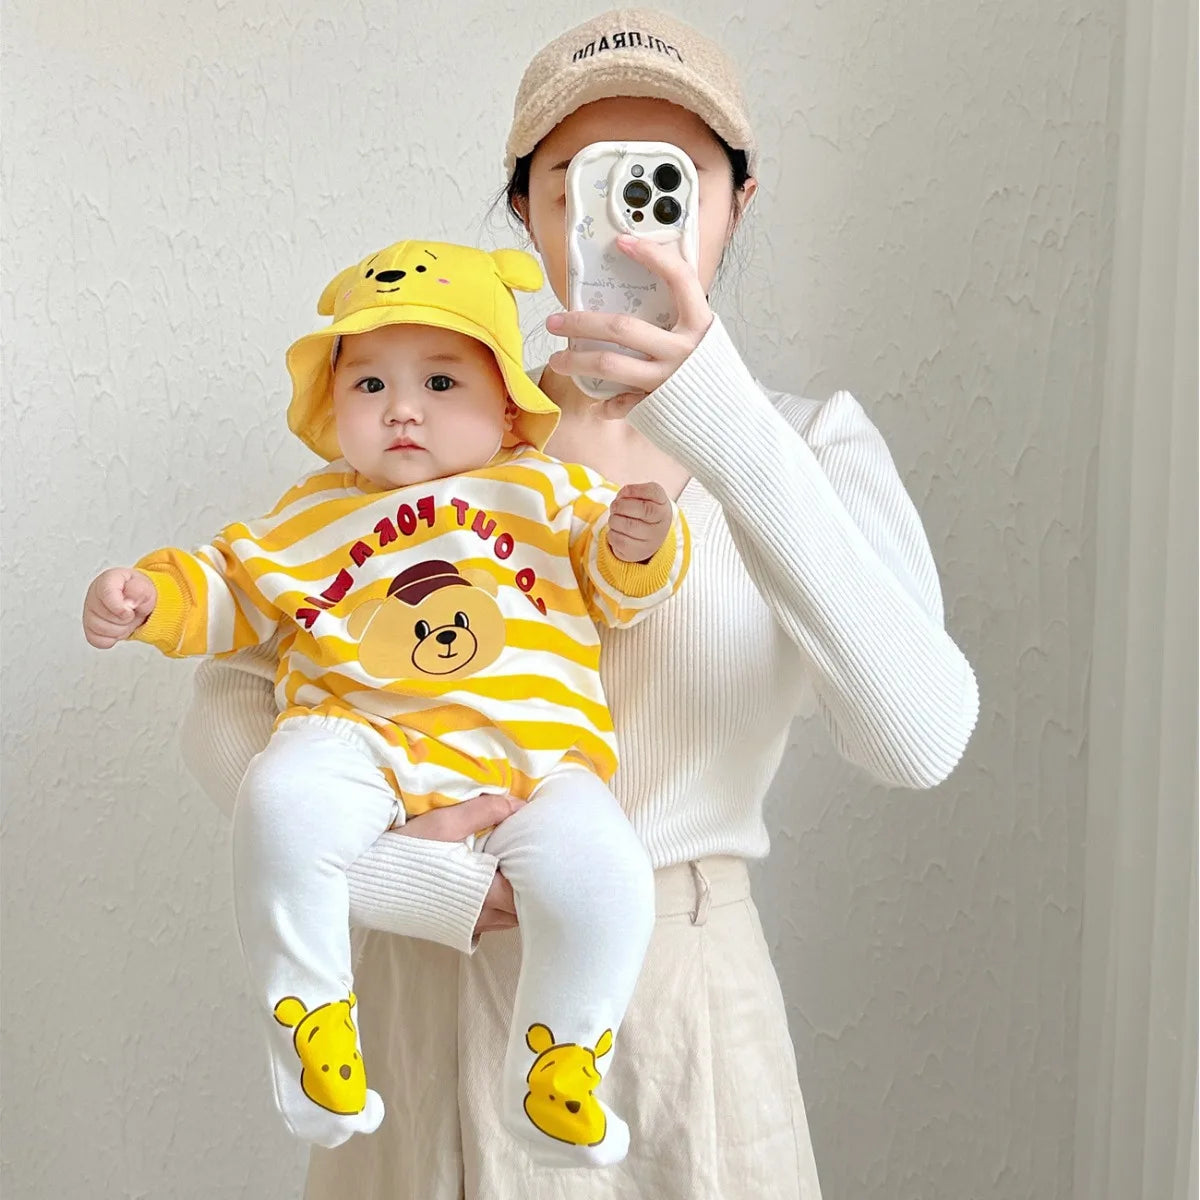 Baby's 100% Cotton Yellow Striped Bodysuit Outfit